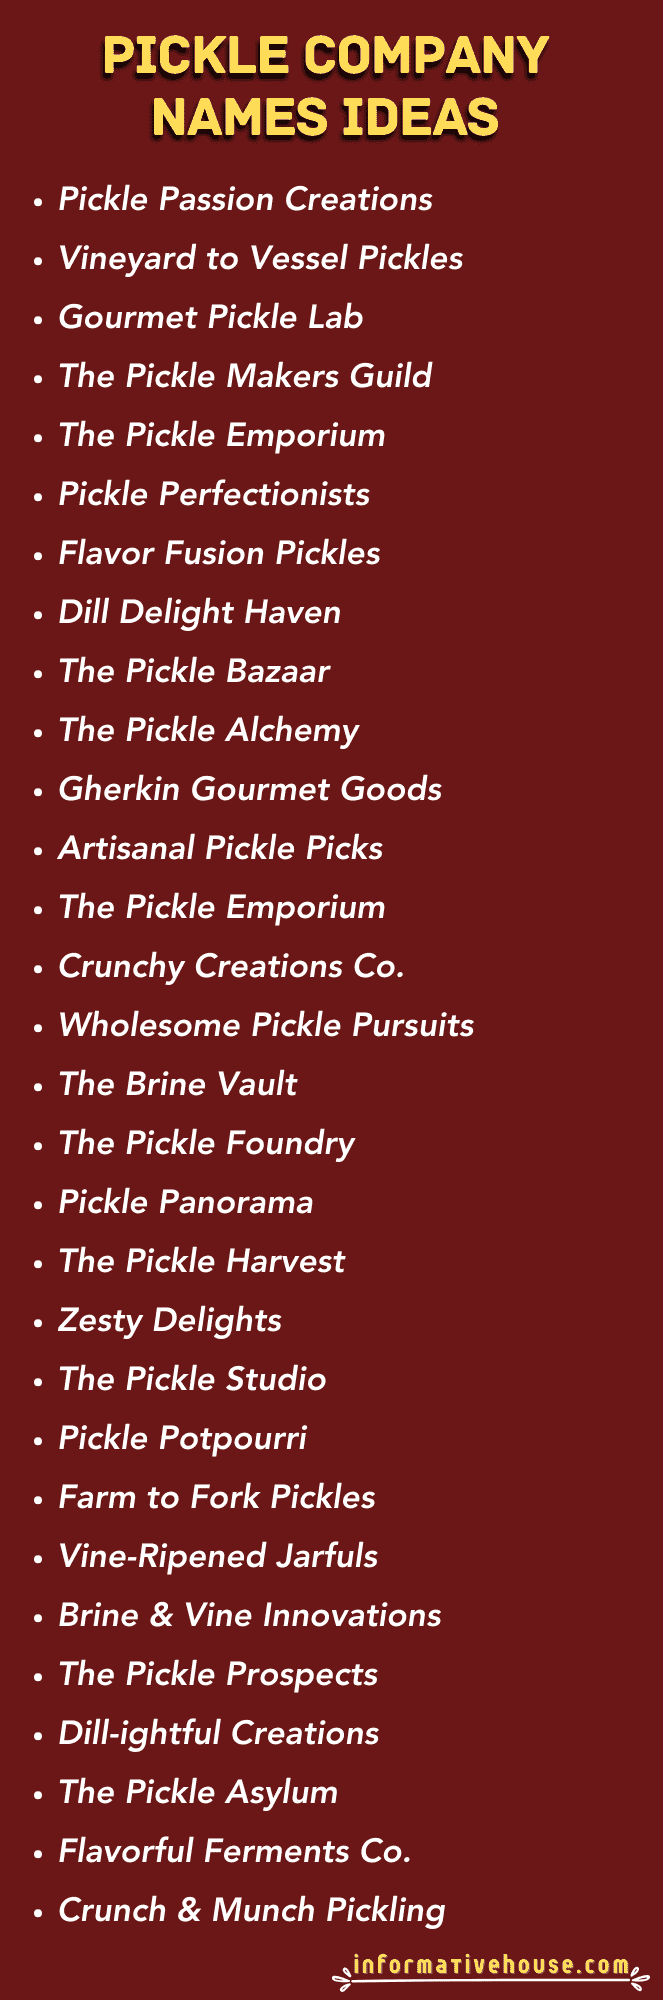 Best 30 Pickle Company Names Ideas for startup